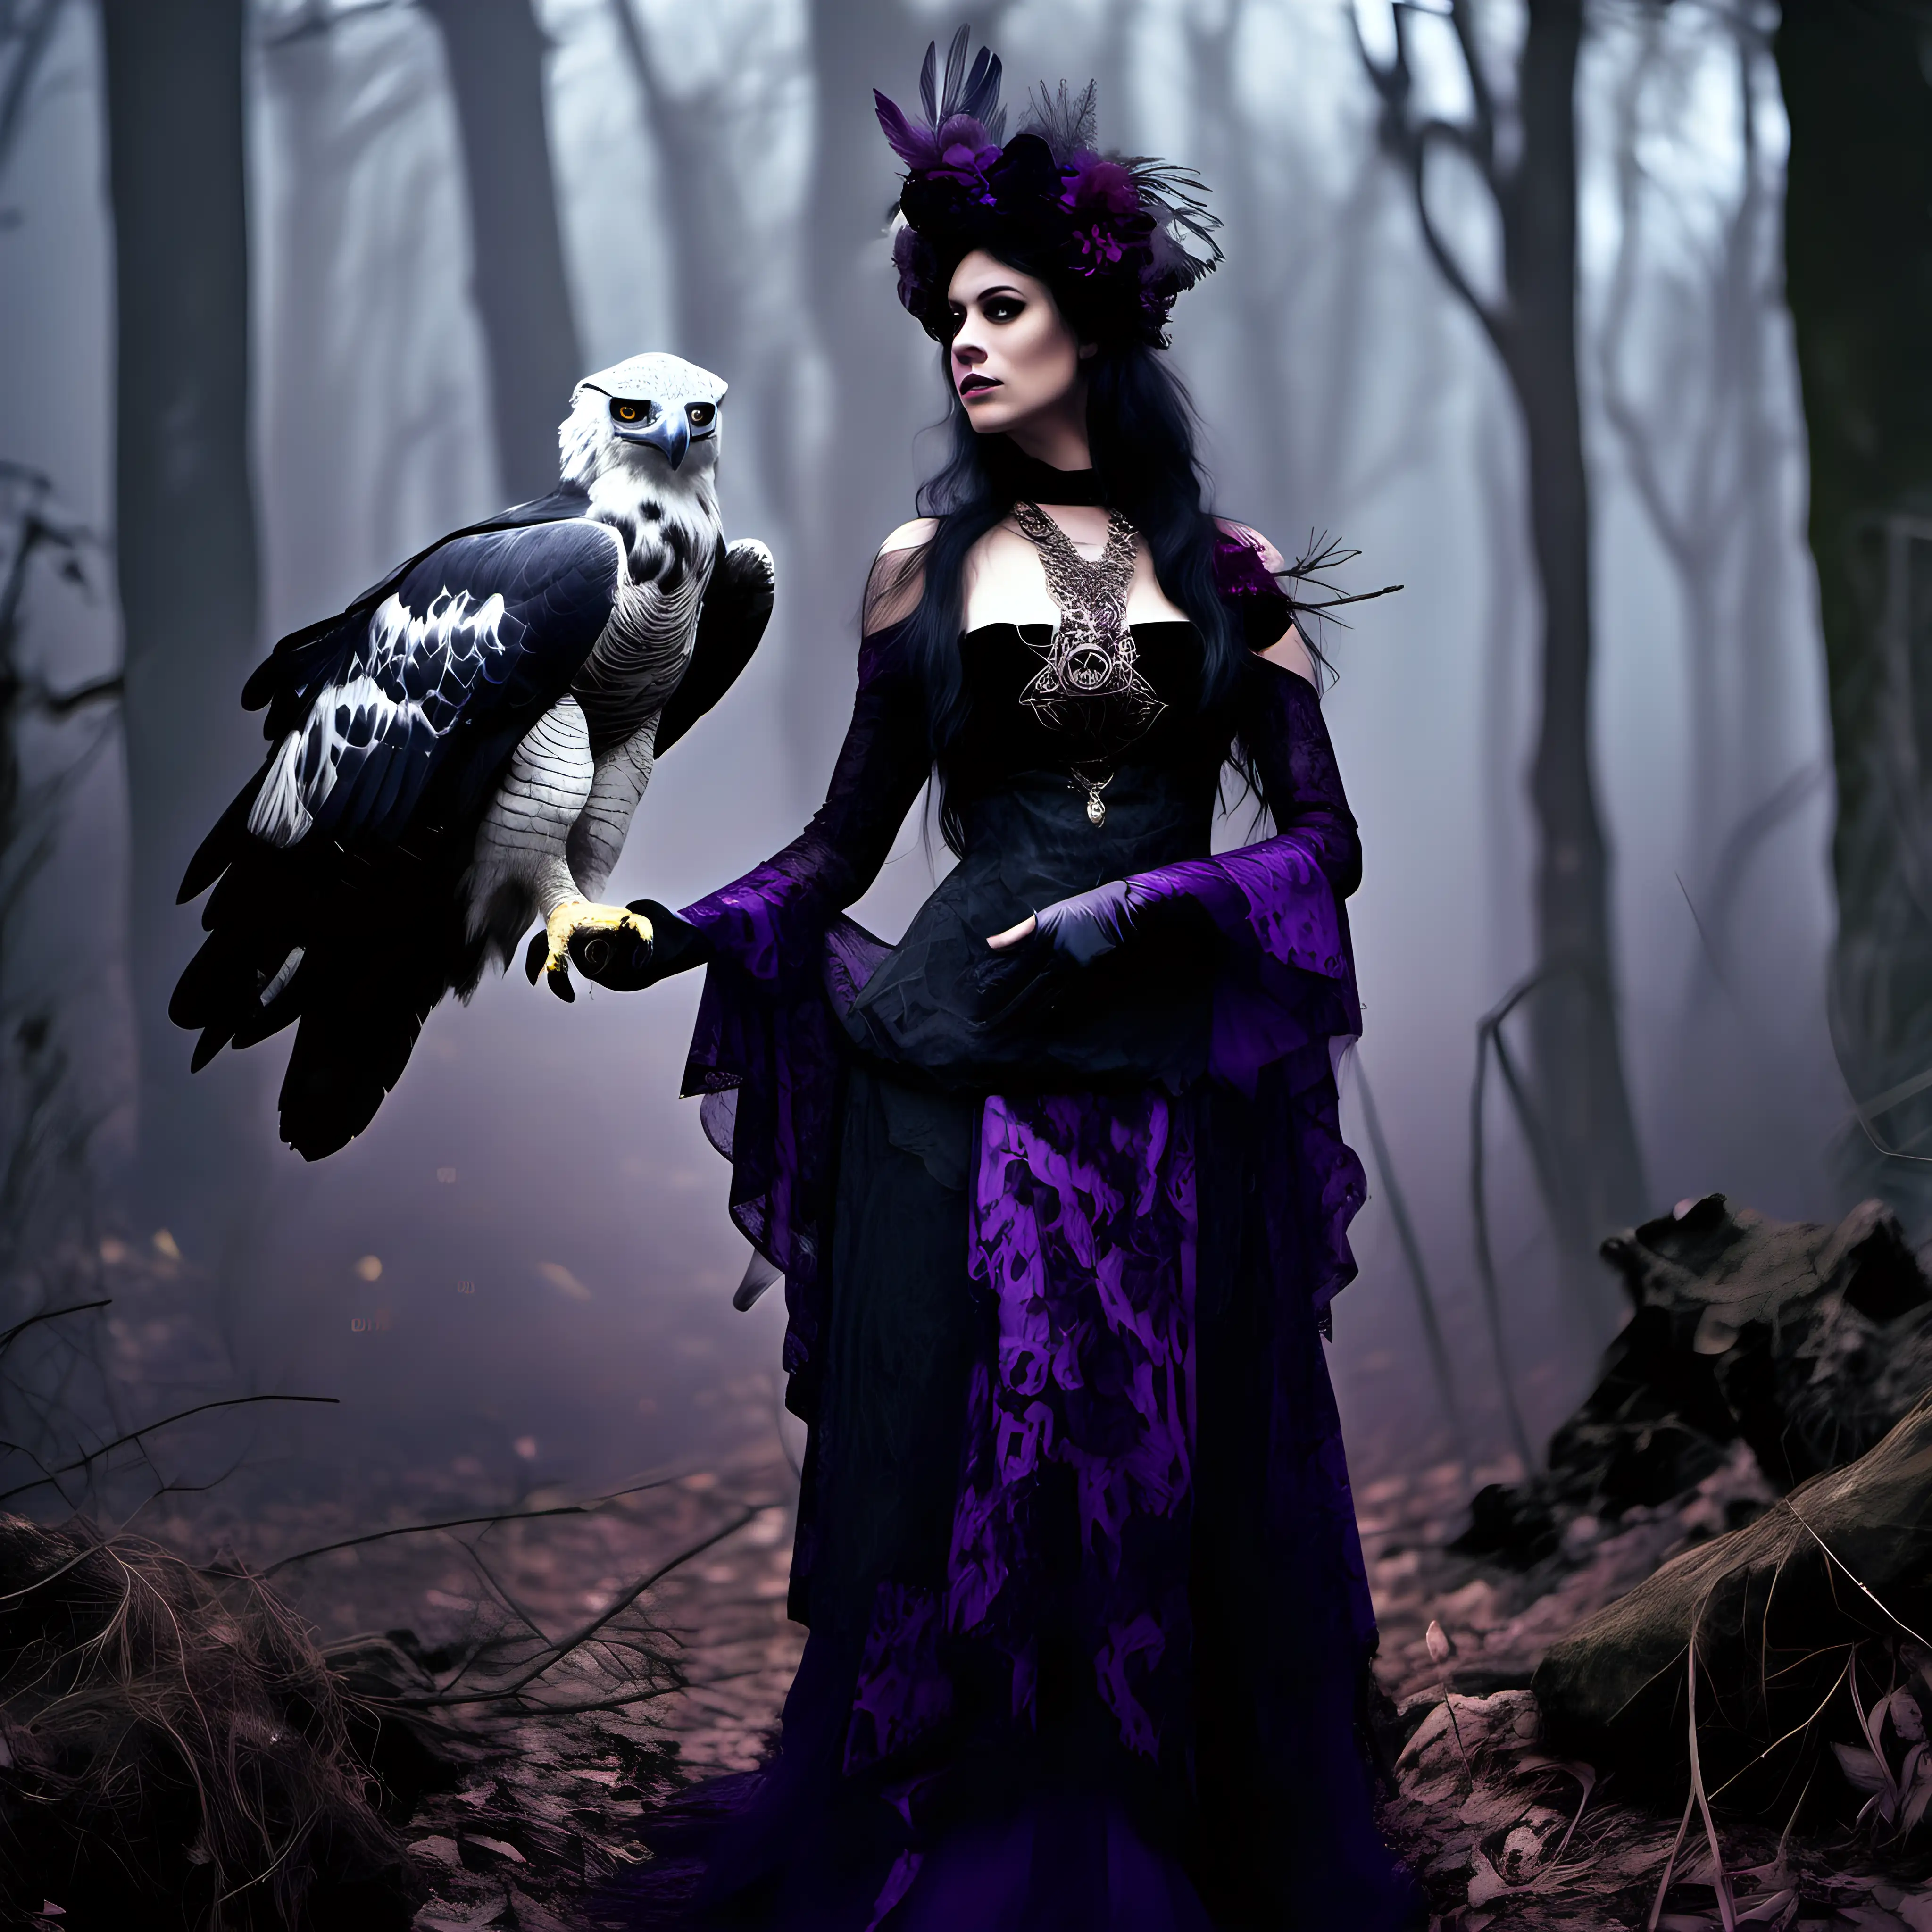 a seeress dressed n a black velvet & lace dress ,purple fingerless gloves on her hands, she has a harpy eagle standing beside her she is in ancient forest